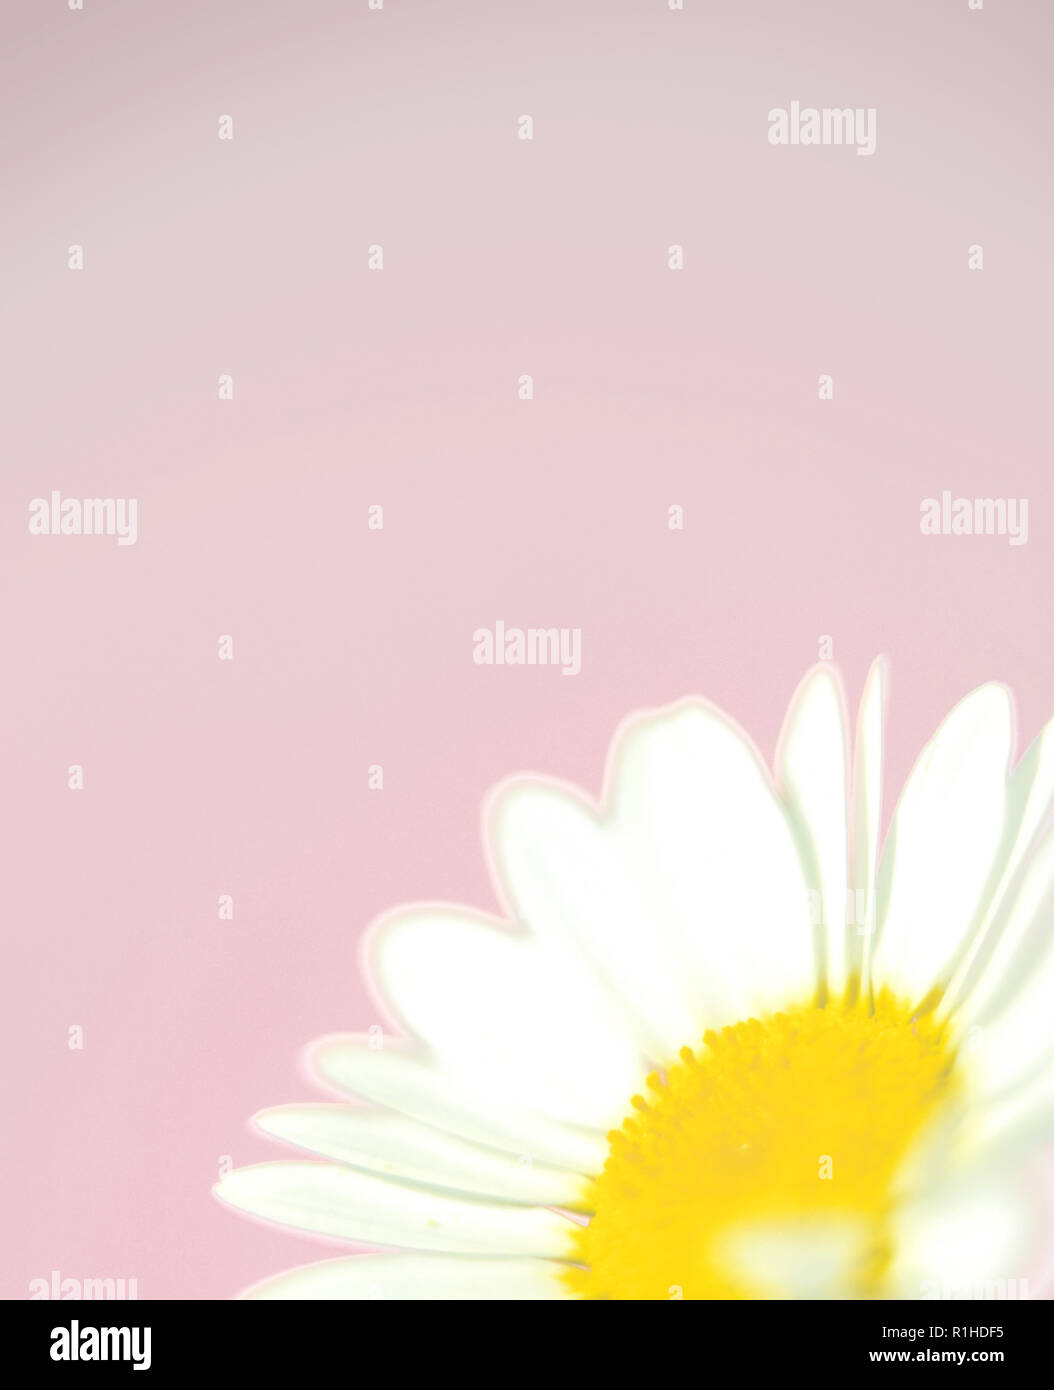 A close up of a daisy against a pink background. Stock Photo